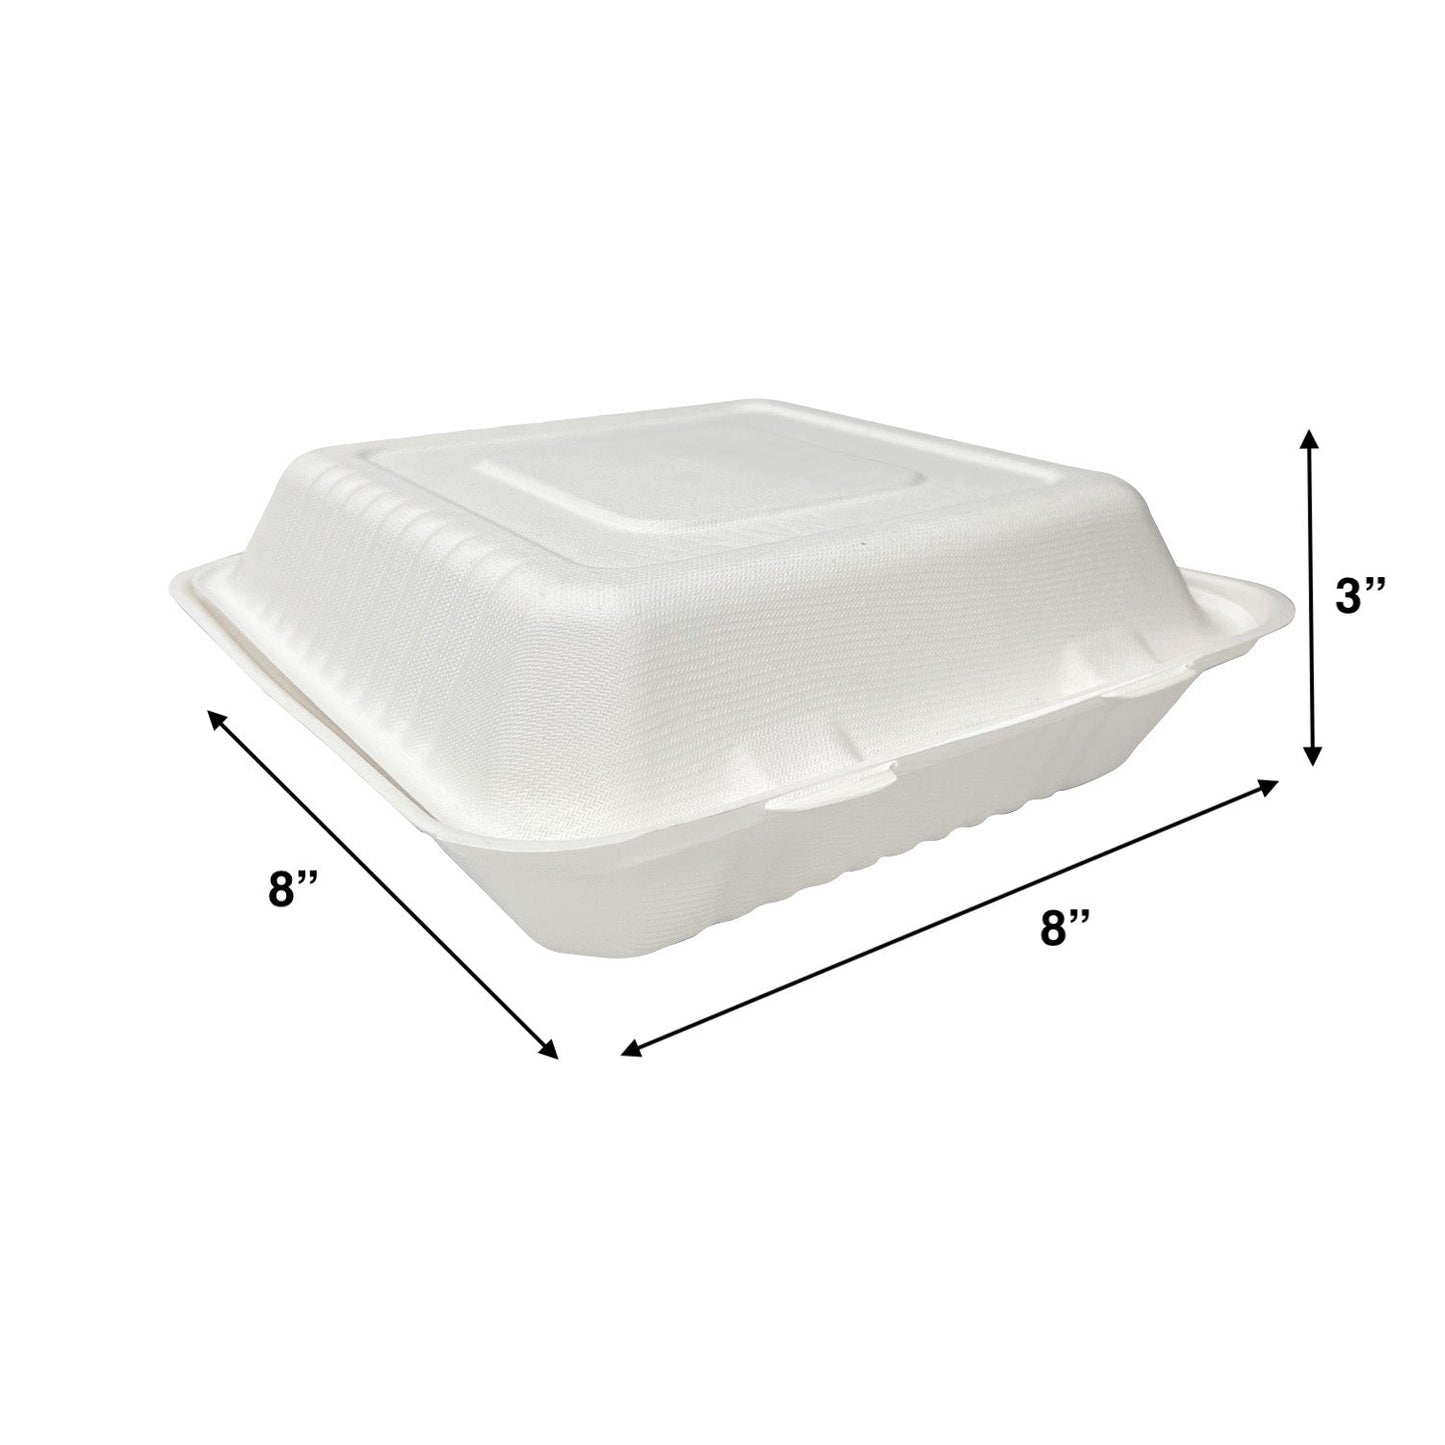 KIS-S8831 | 8x8x3 inches, 1-Compartment, Sugarcane Clamshell Food Container; $0.254/pc